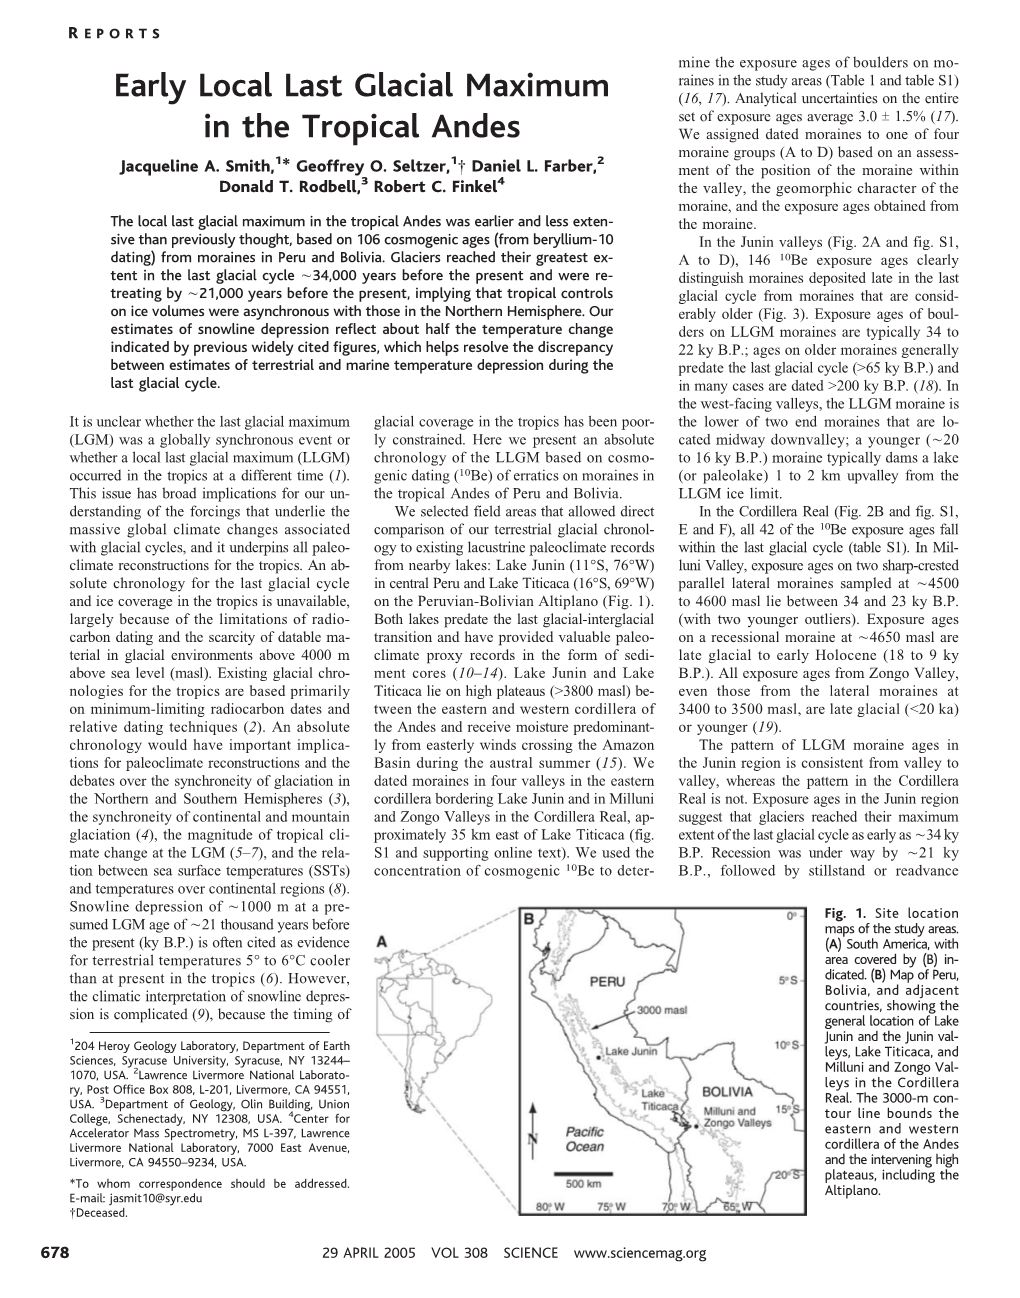 Early Local Last Glacial Maximum in the Tropical Andes